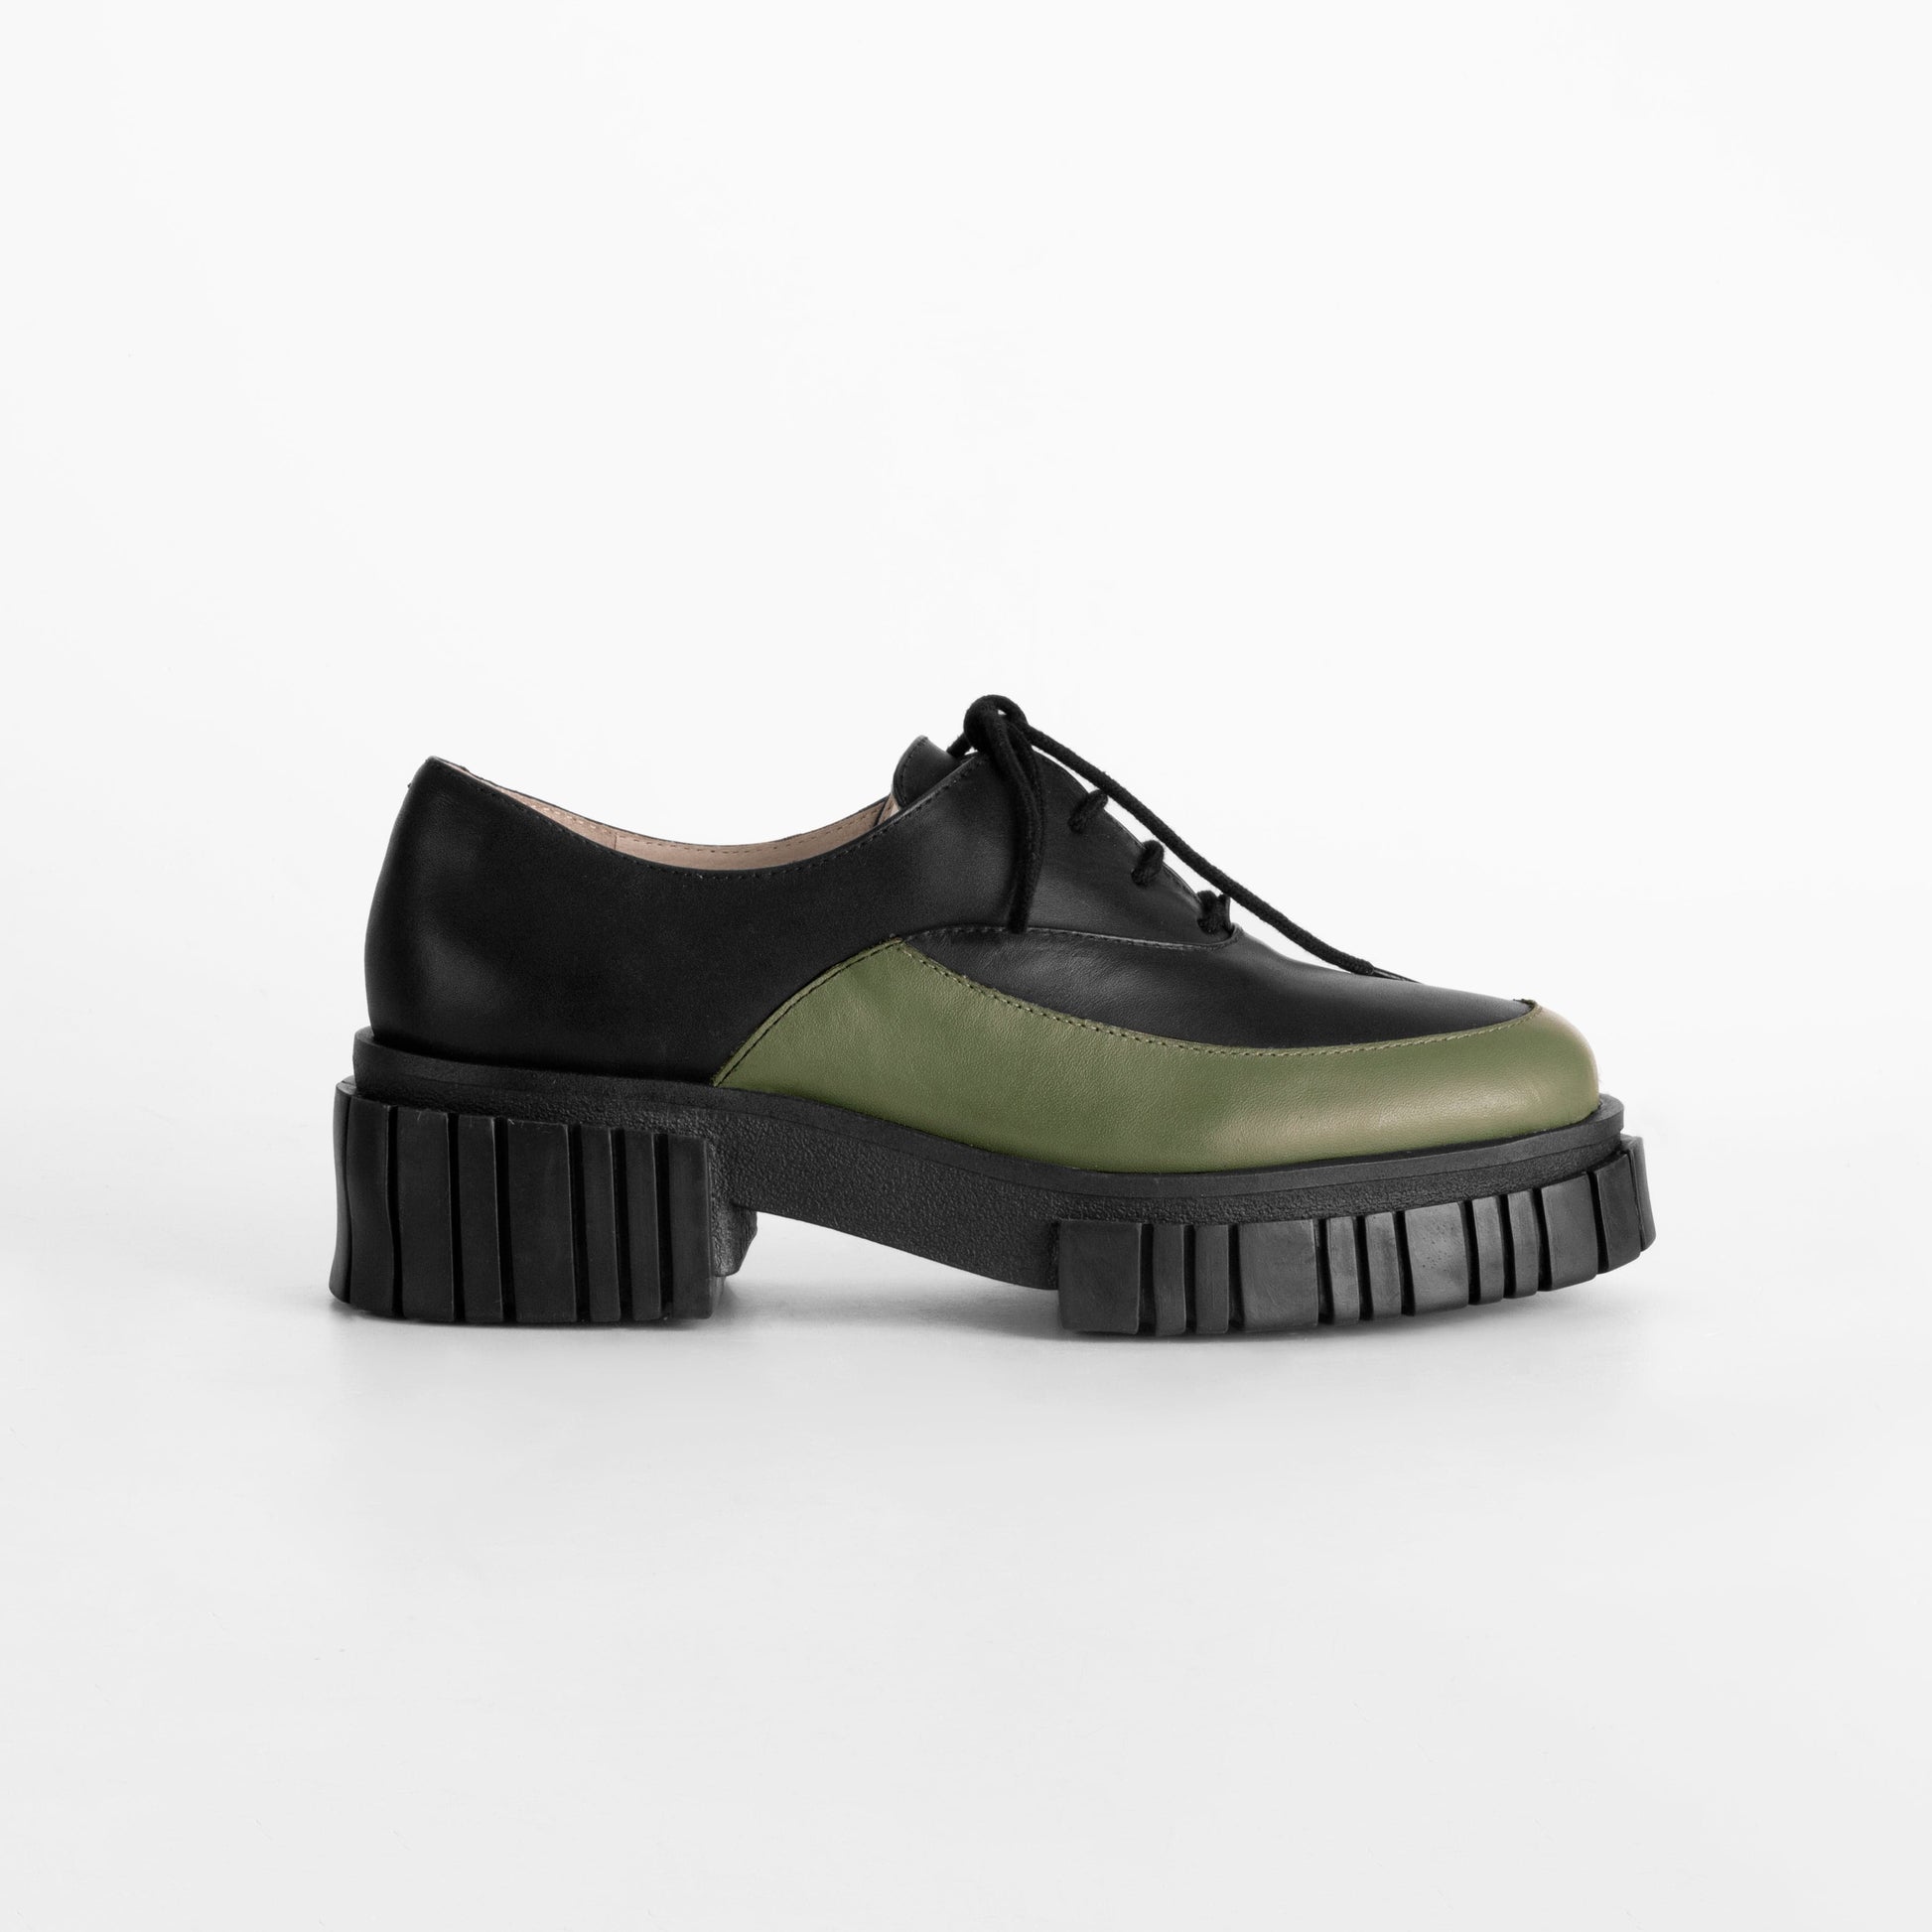 Vinci Shoes Betina Military Green Oxfords